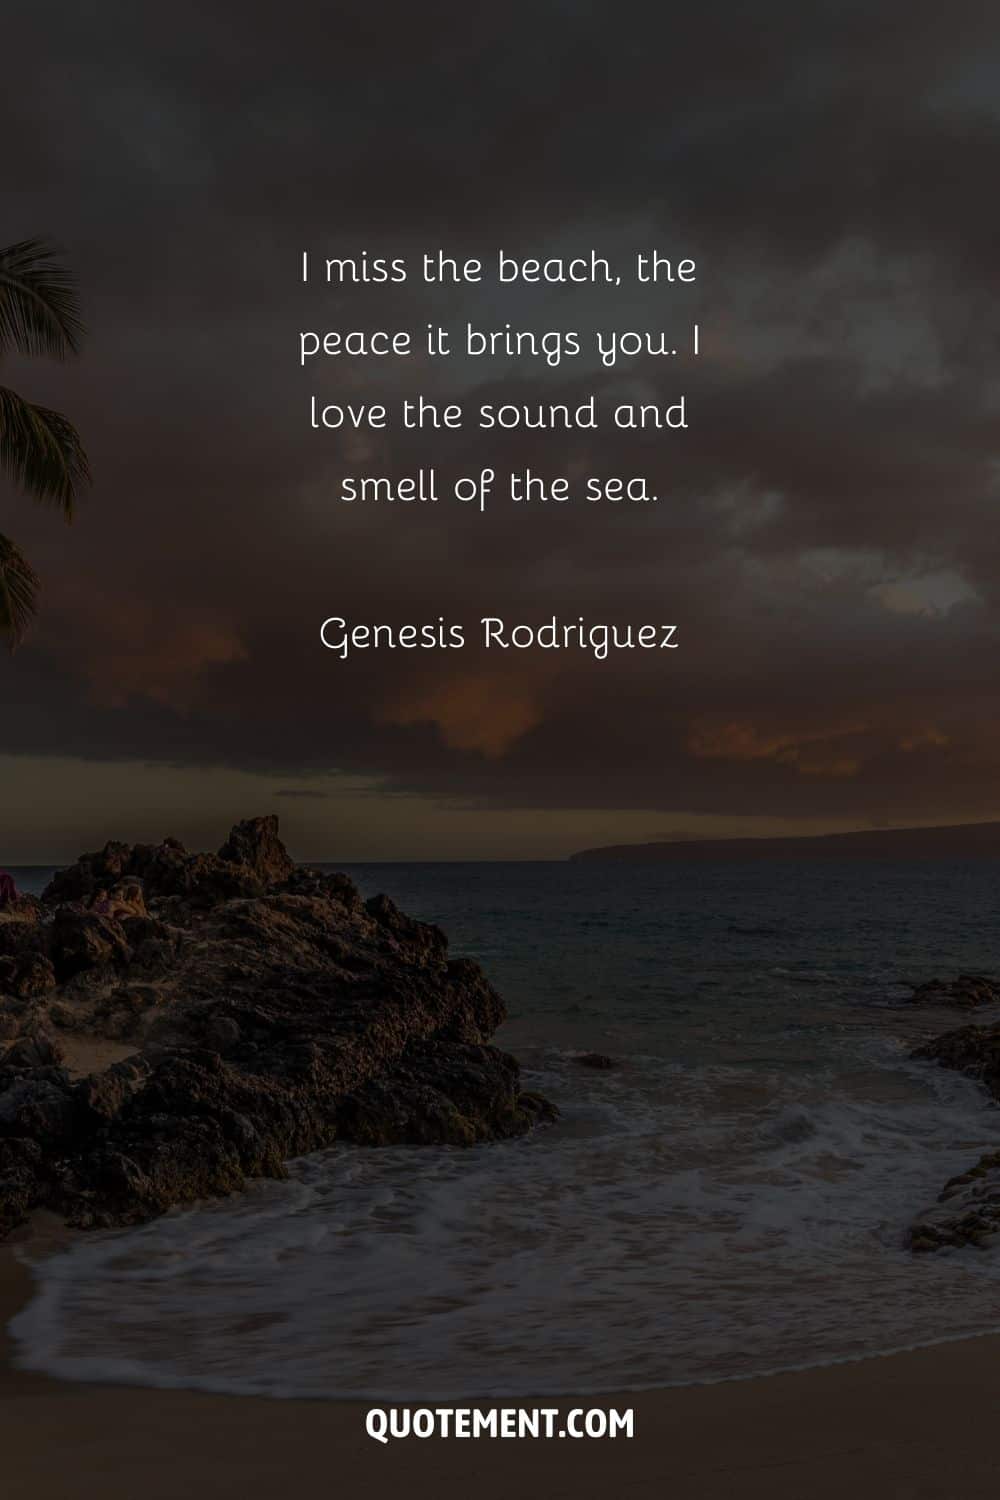 I miss the beach, the peace it brings you. I love the sound and smell of the sea. — Genesis Rodriguez